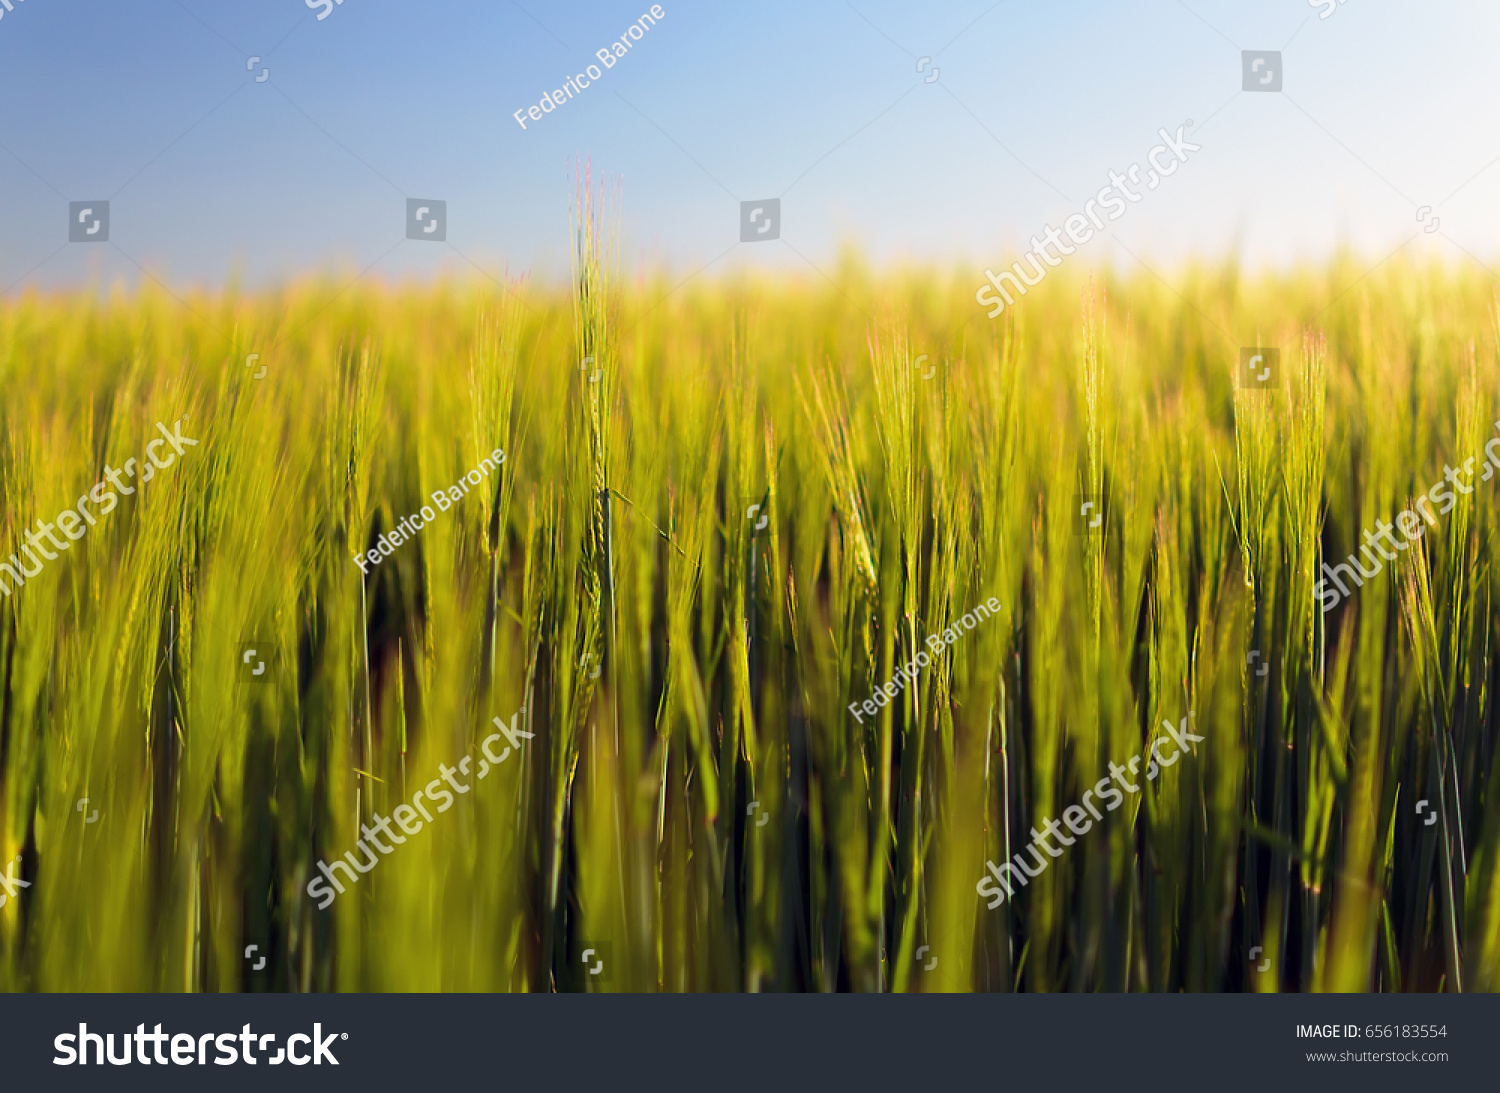 stock-photo-field-of-young-and-green-bar